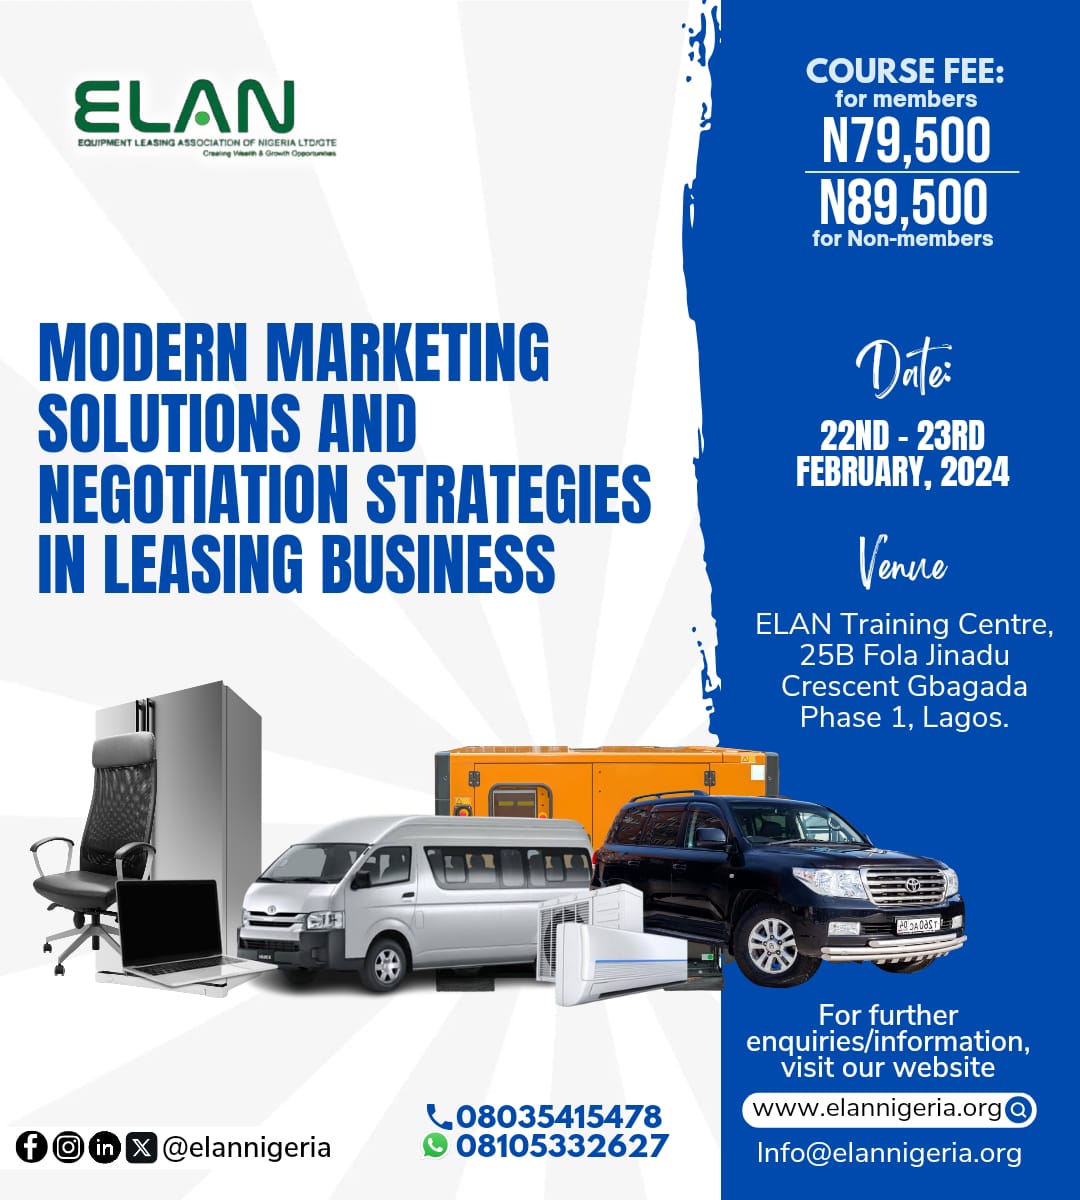 Modern Marketing Solutions and Negotiation strategies in Leasing Business: 22nd – 22rd February, 2024